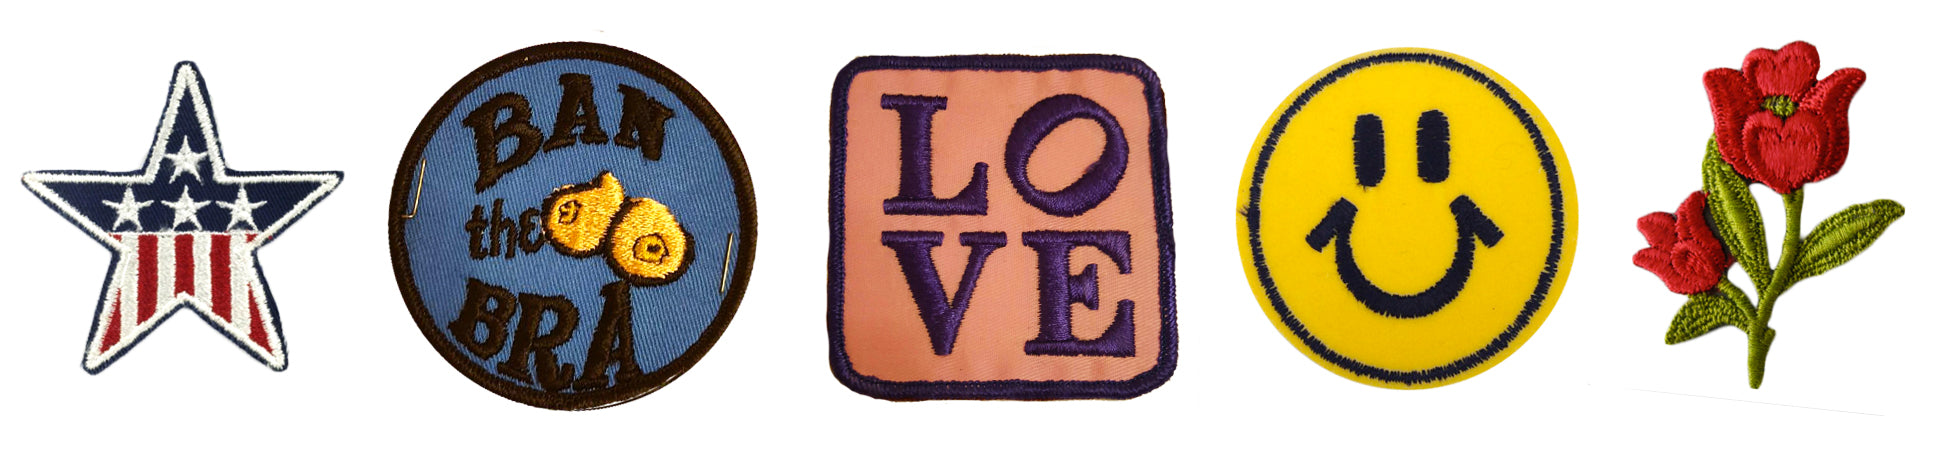 clothing-patches-history-hippie1